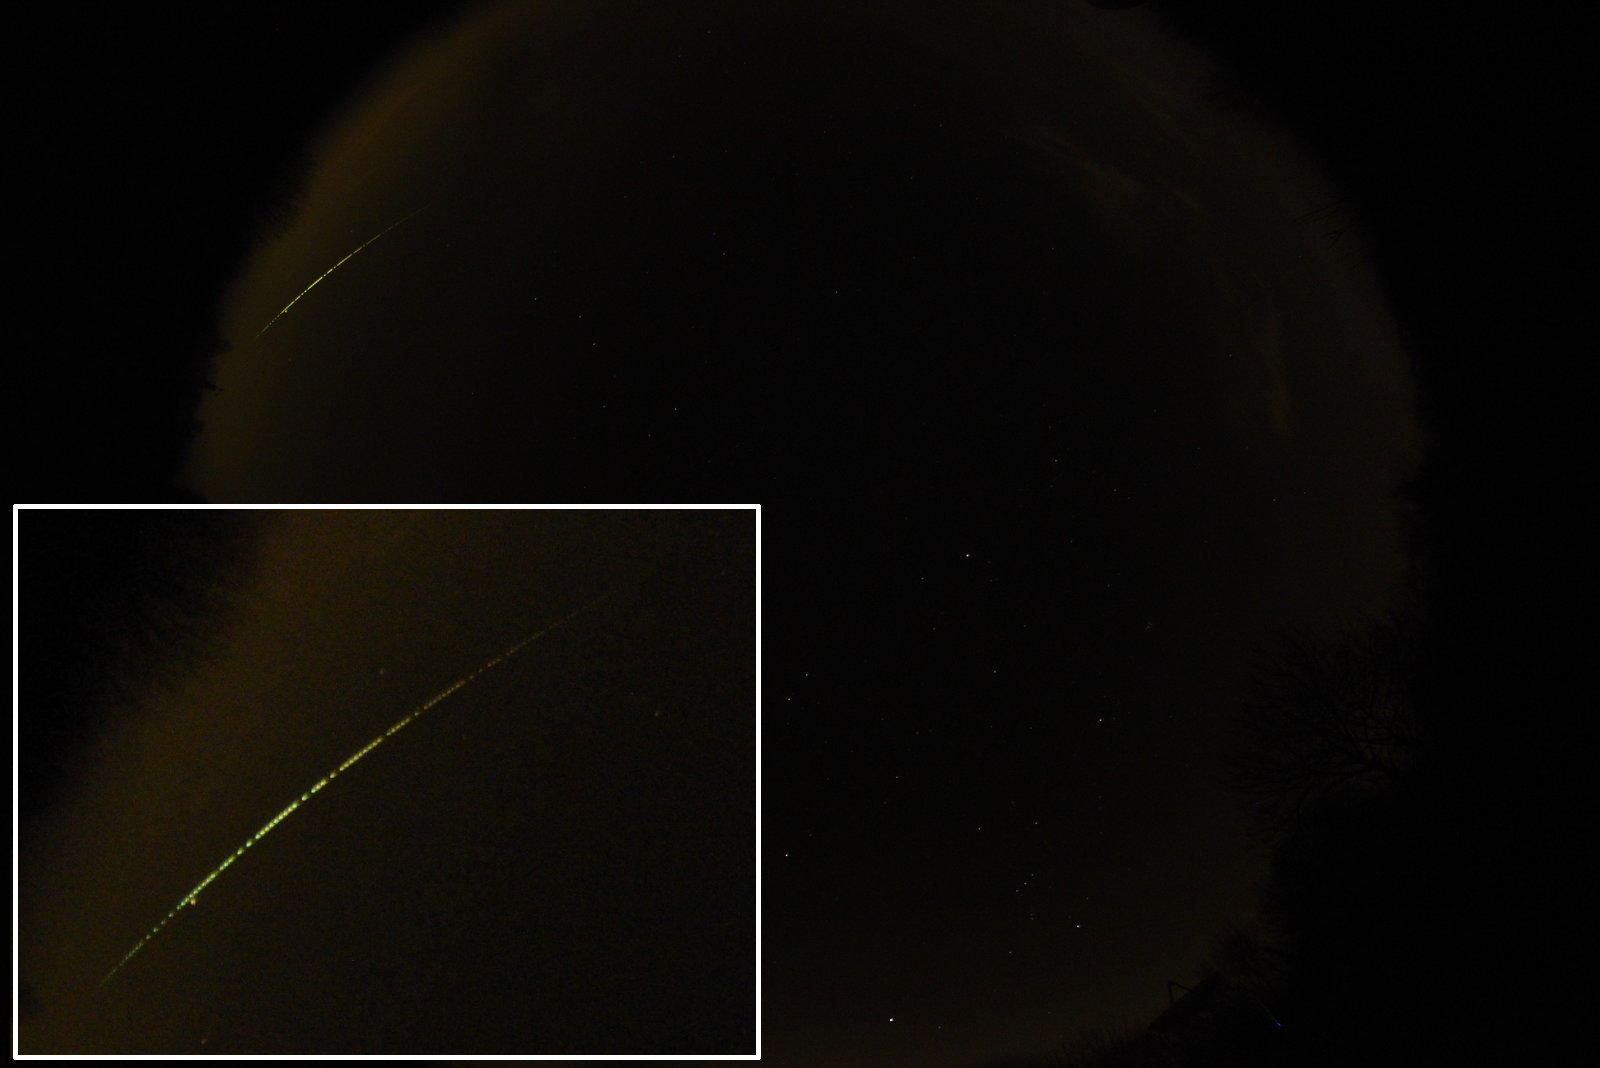 2020-02-16 fireball as captured by UKFN camera system at MRAO in Cambridge.